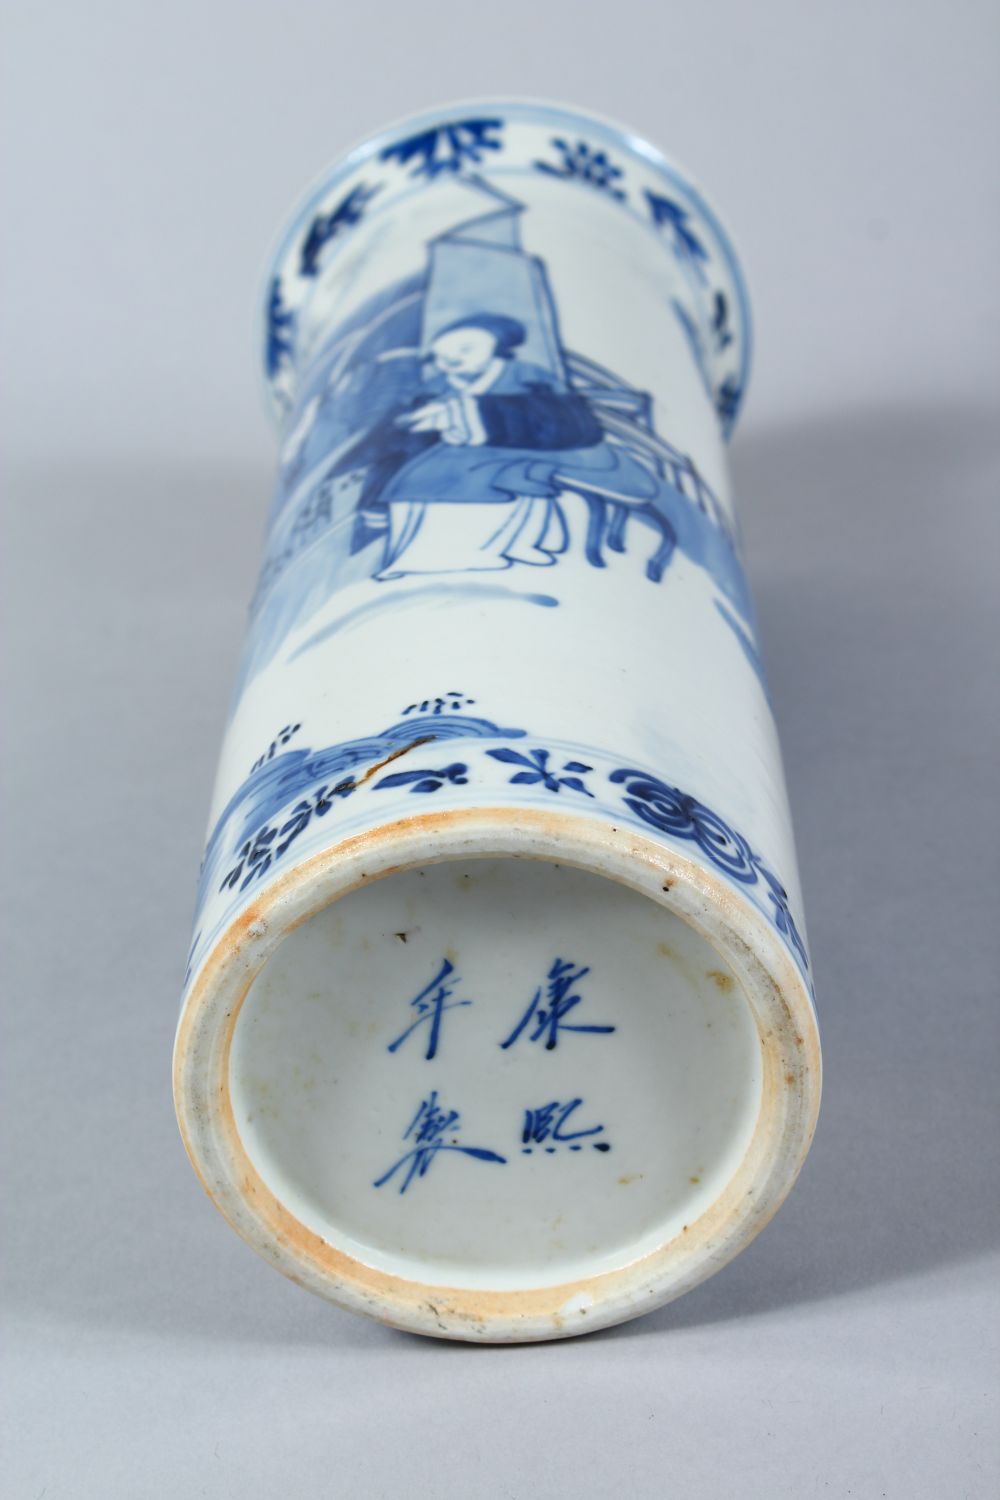 A 19TH CENTURY CHINESE BLUE & WHITE PORCELAIN CYLINDRICAL VASE, the vase decorated with scenes of - Image 7 of 8